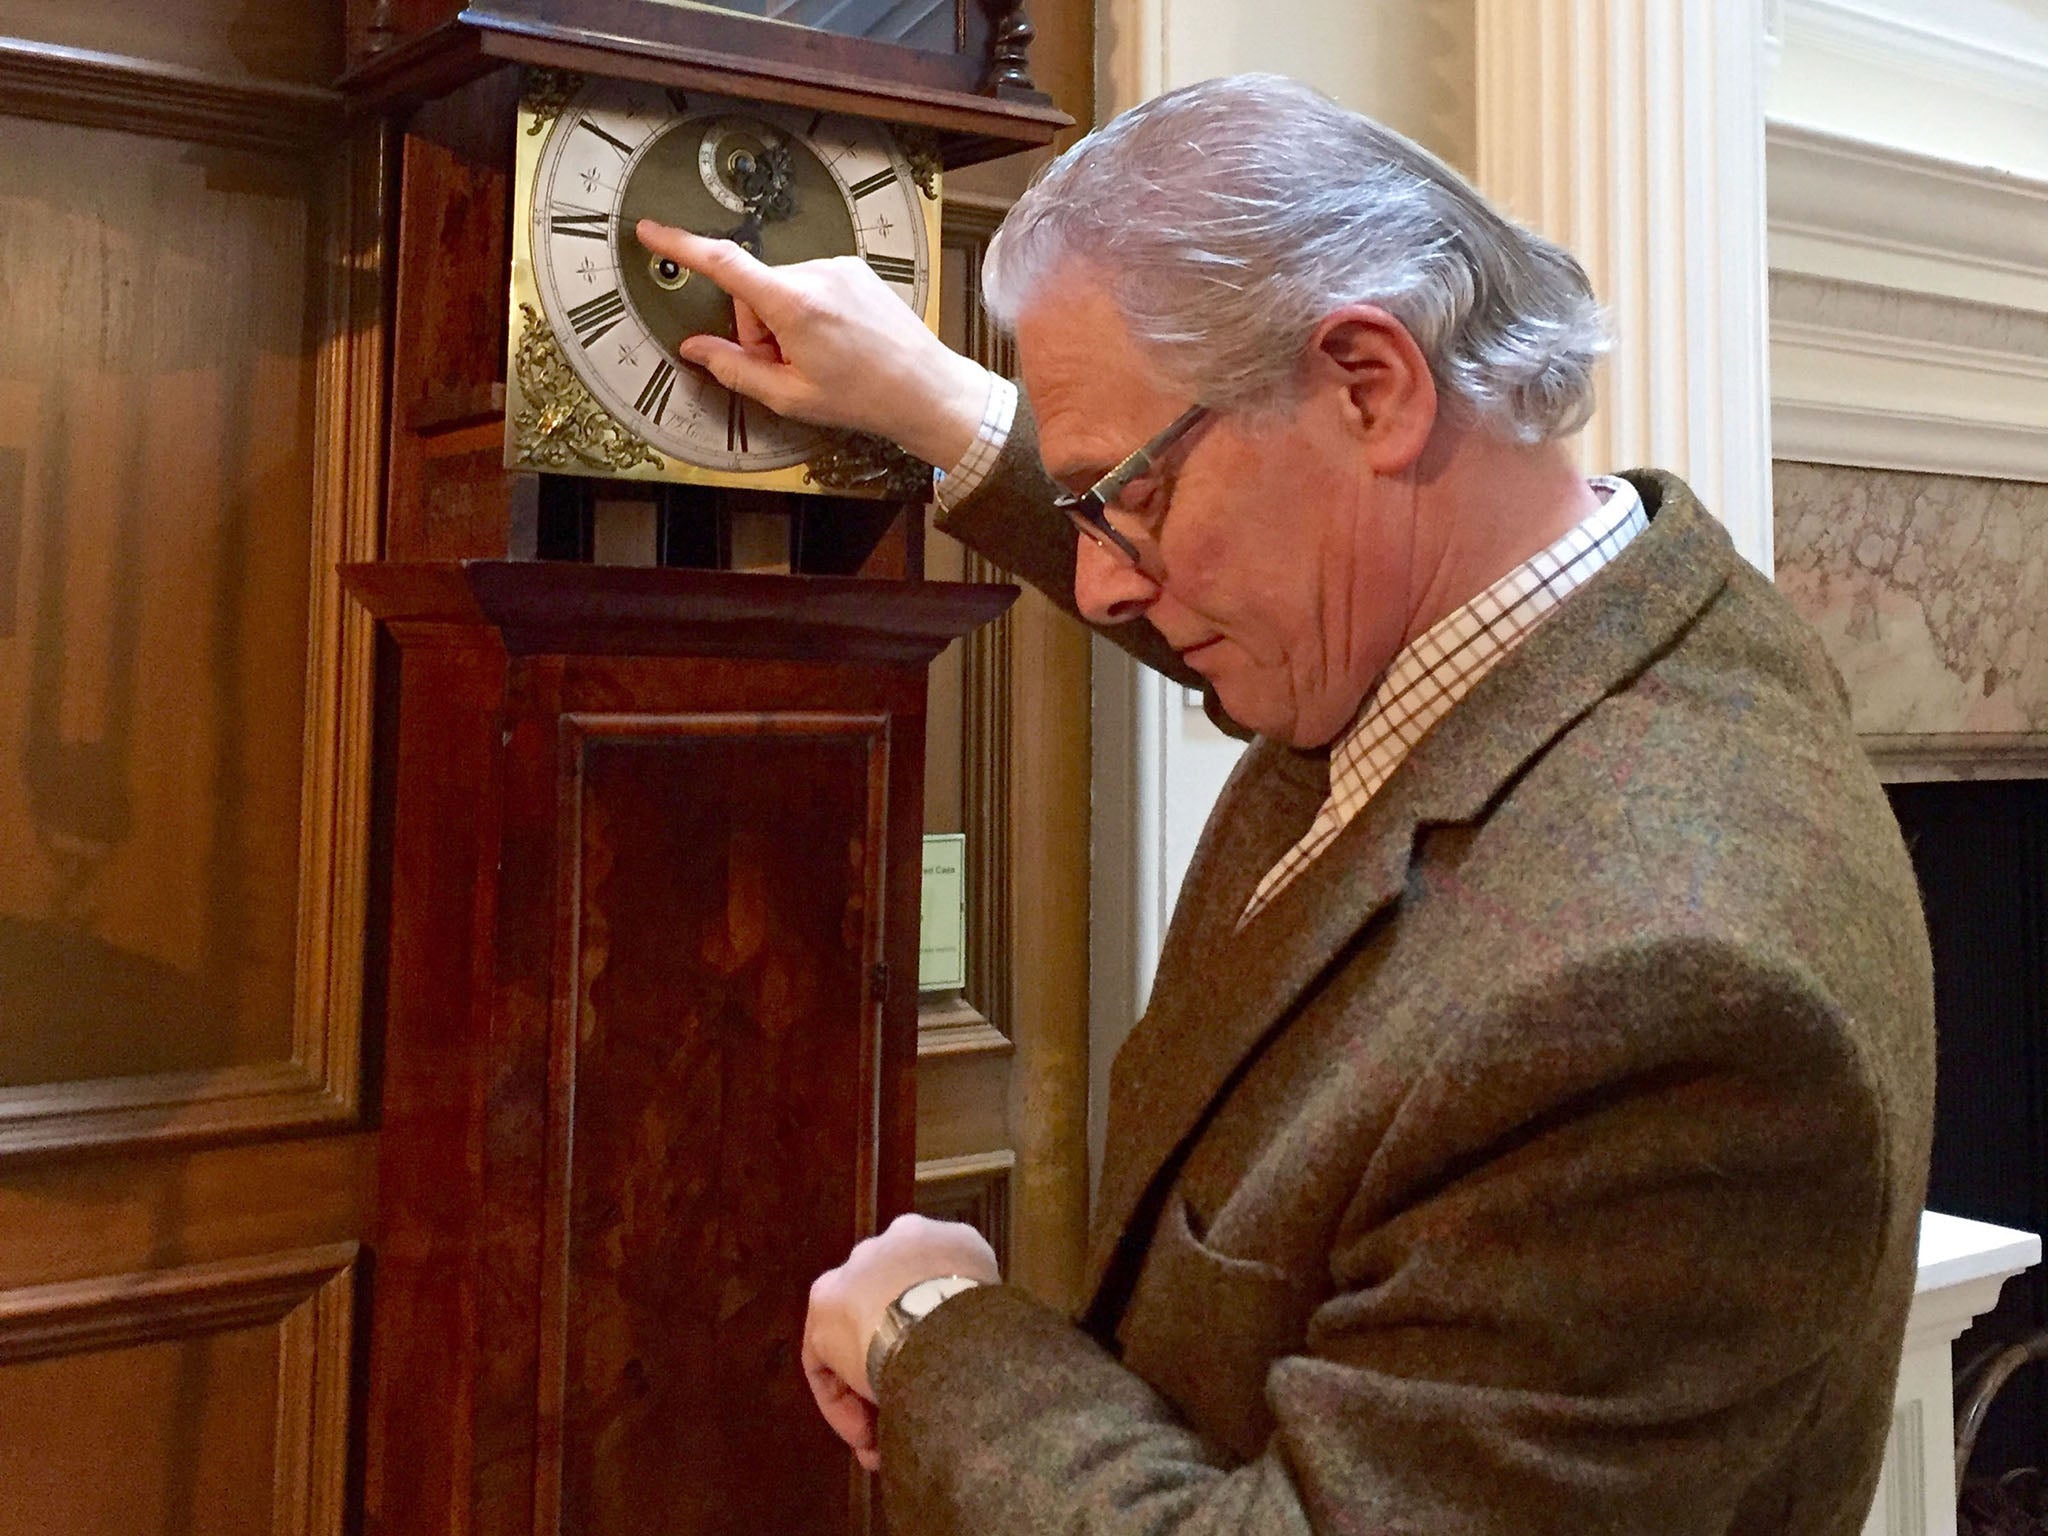 The time enthusiast is curator at the British Horological Institute (BHI) museum trust, meaning he is responsible for winding and adjusting around 4,000 watches and clocks.